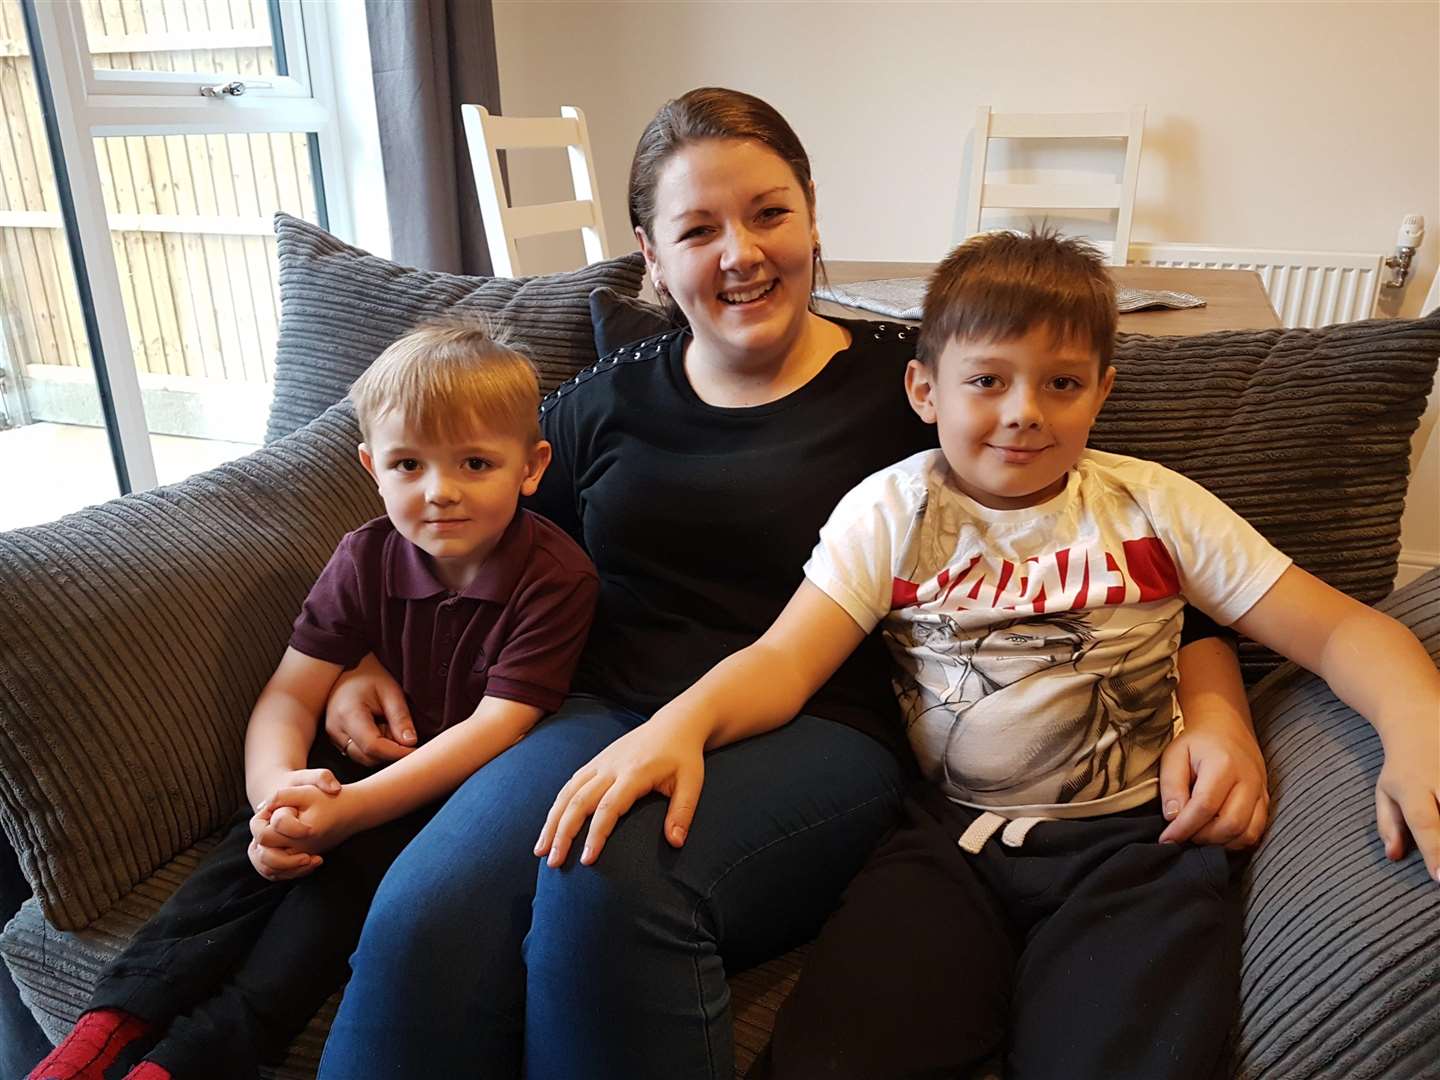 Lucy Marshall, one of the new residents, with her sons